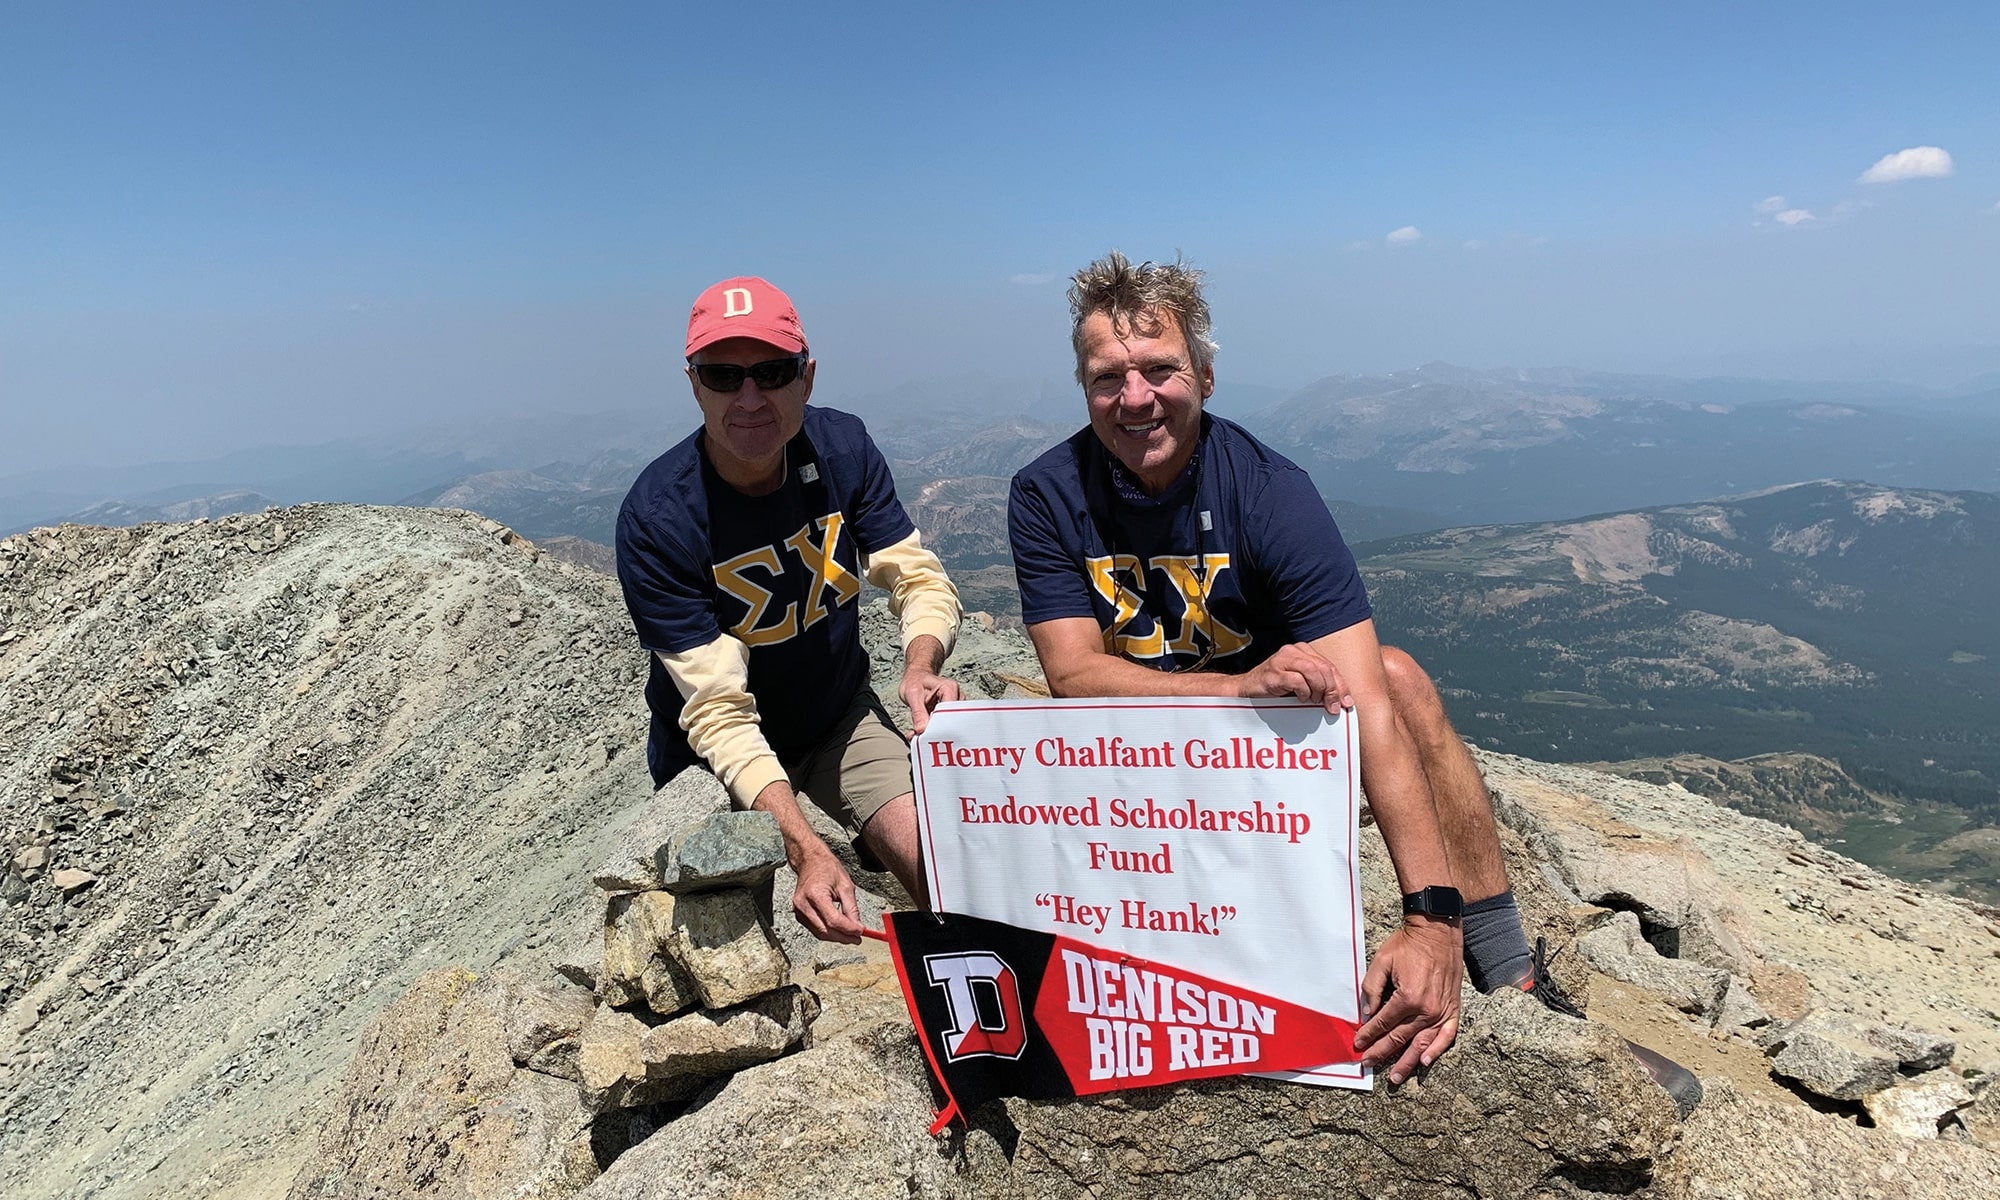 MILE HI: Scott Aiken 83 and Jay Snouffer 83 decked out in their Sigma Chi shirts at the top of Mount Massive.